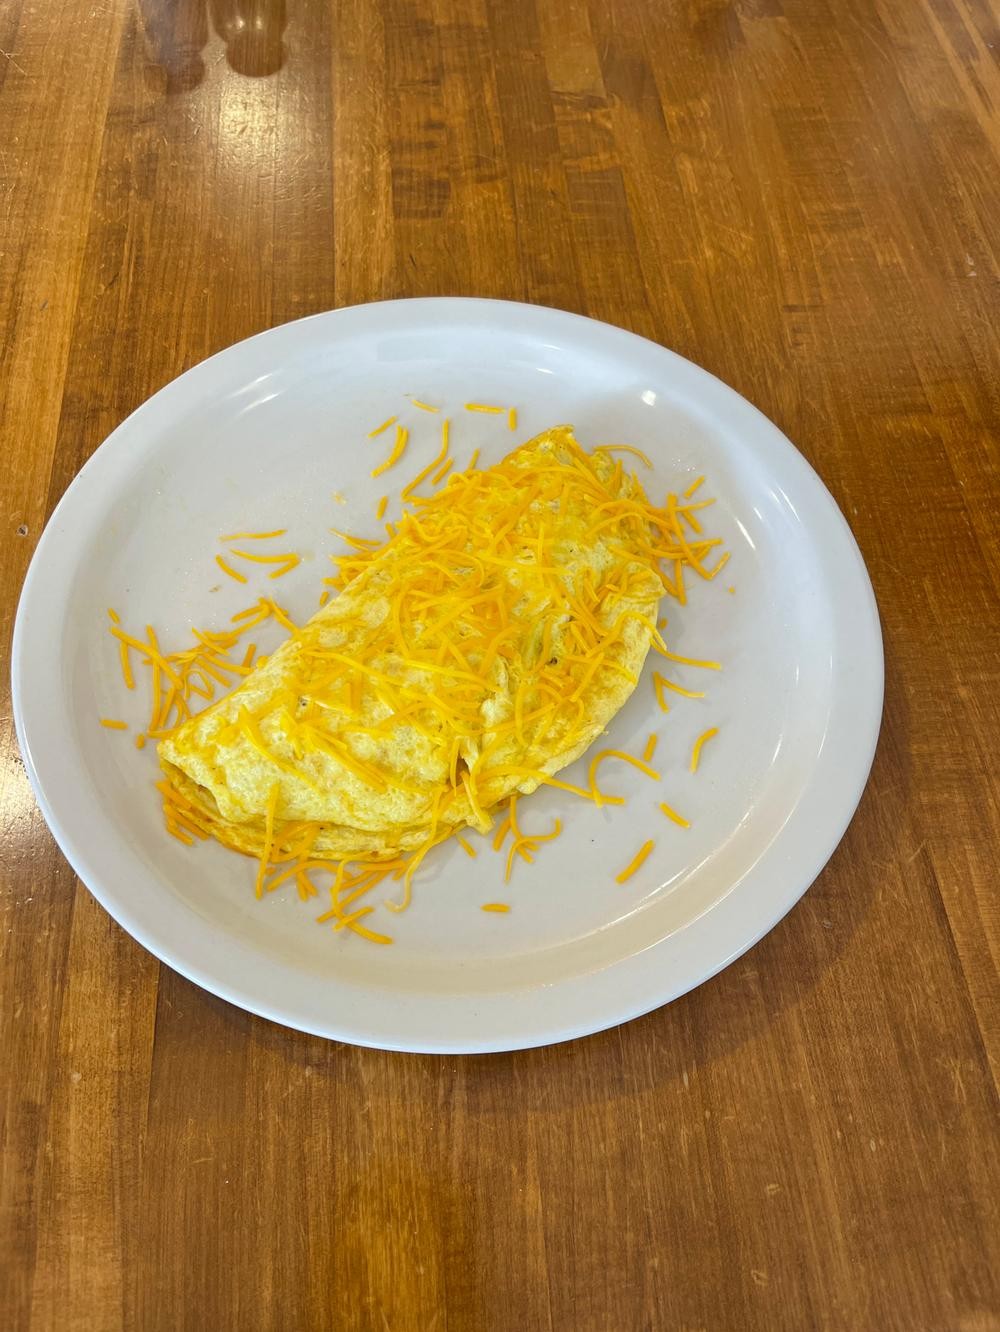 Cheesy Omelette